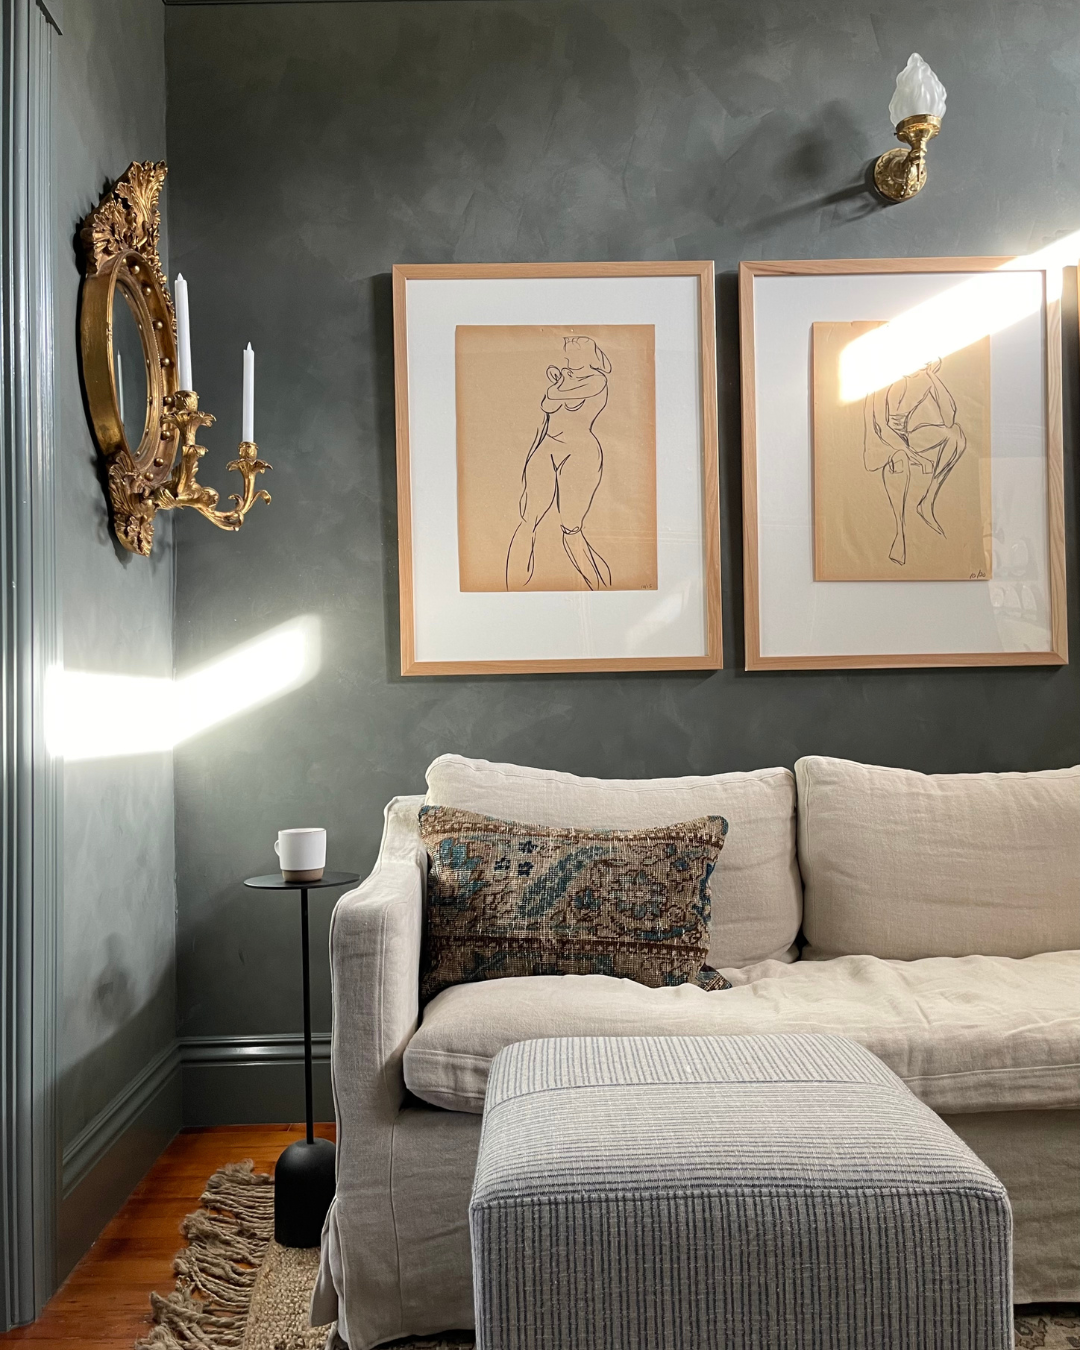 Kim Lucian's living room with gray painted walls, a pair of man and women pencil sketched paintings, a gilded Girandole mirror, a comfortable linen sofa and ottoman, and a modern black steel side table. The space harmonizes moody colors and ornate details.